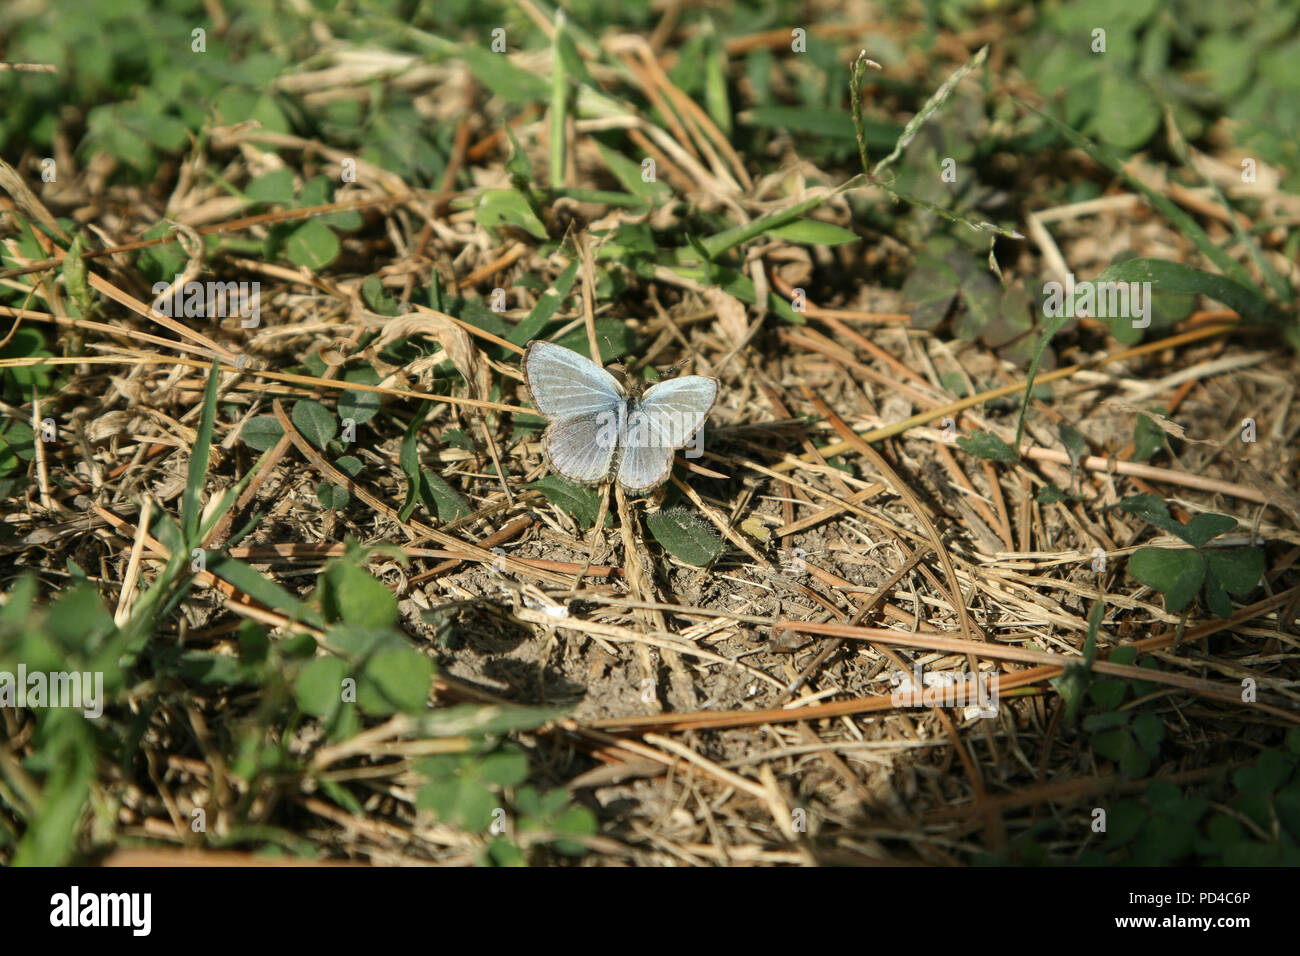 Small blue lycaenidae butterfly in the grass Stock Photo